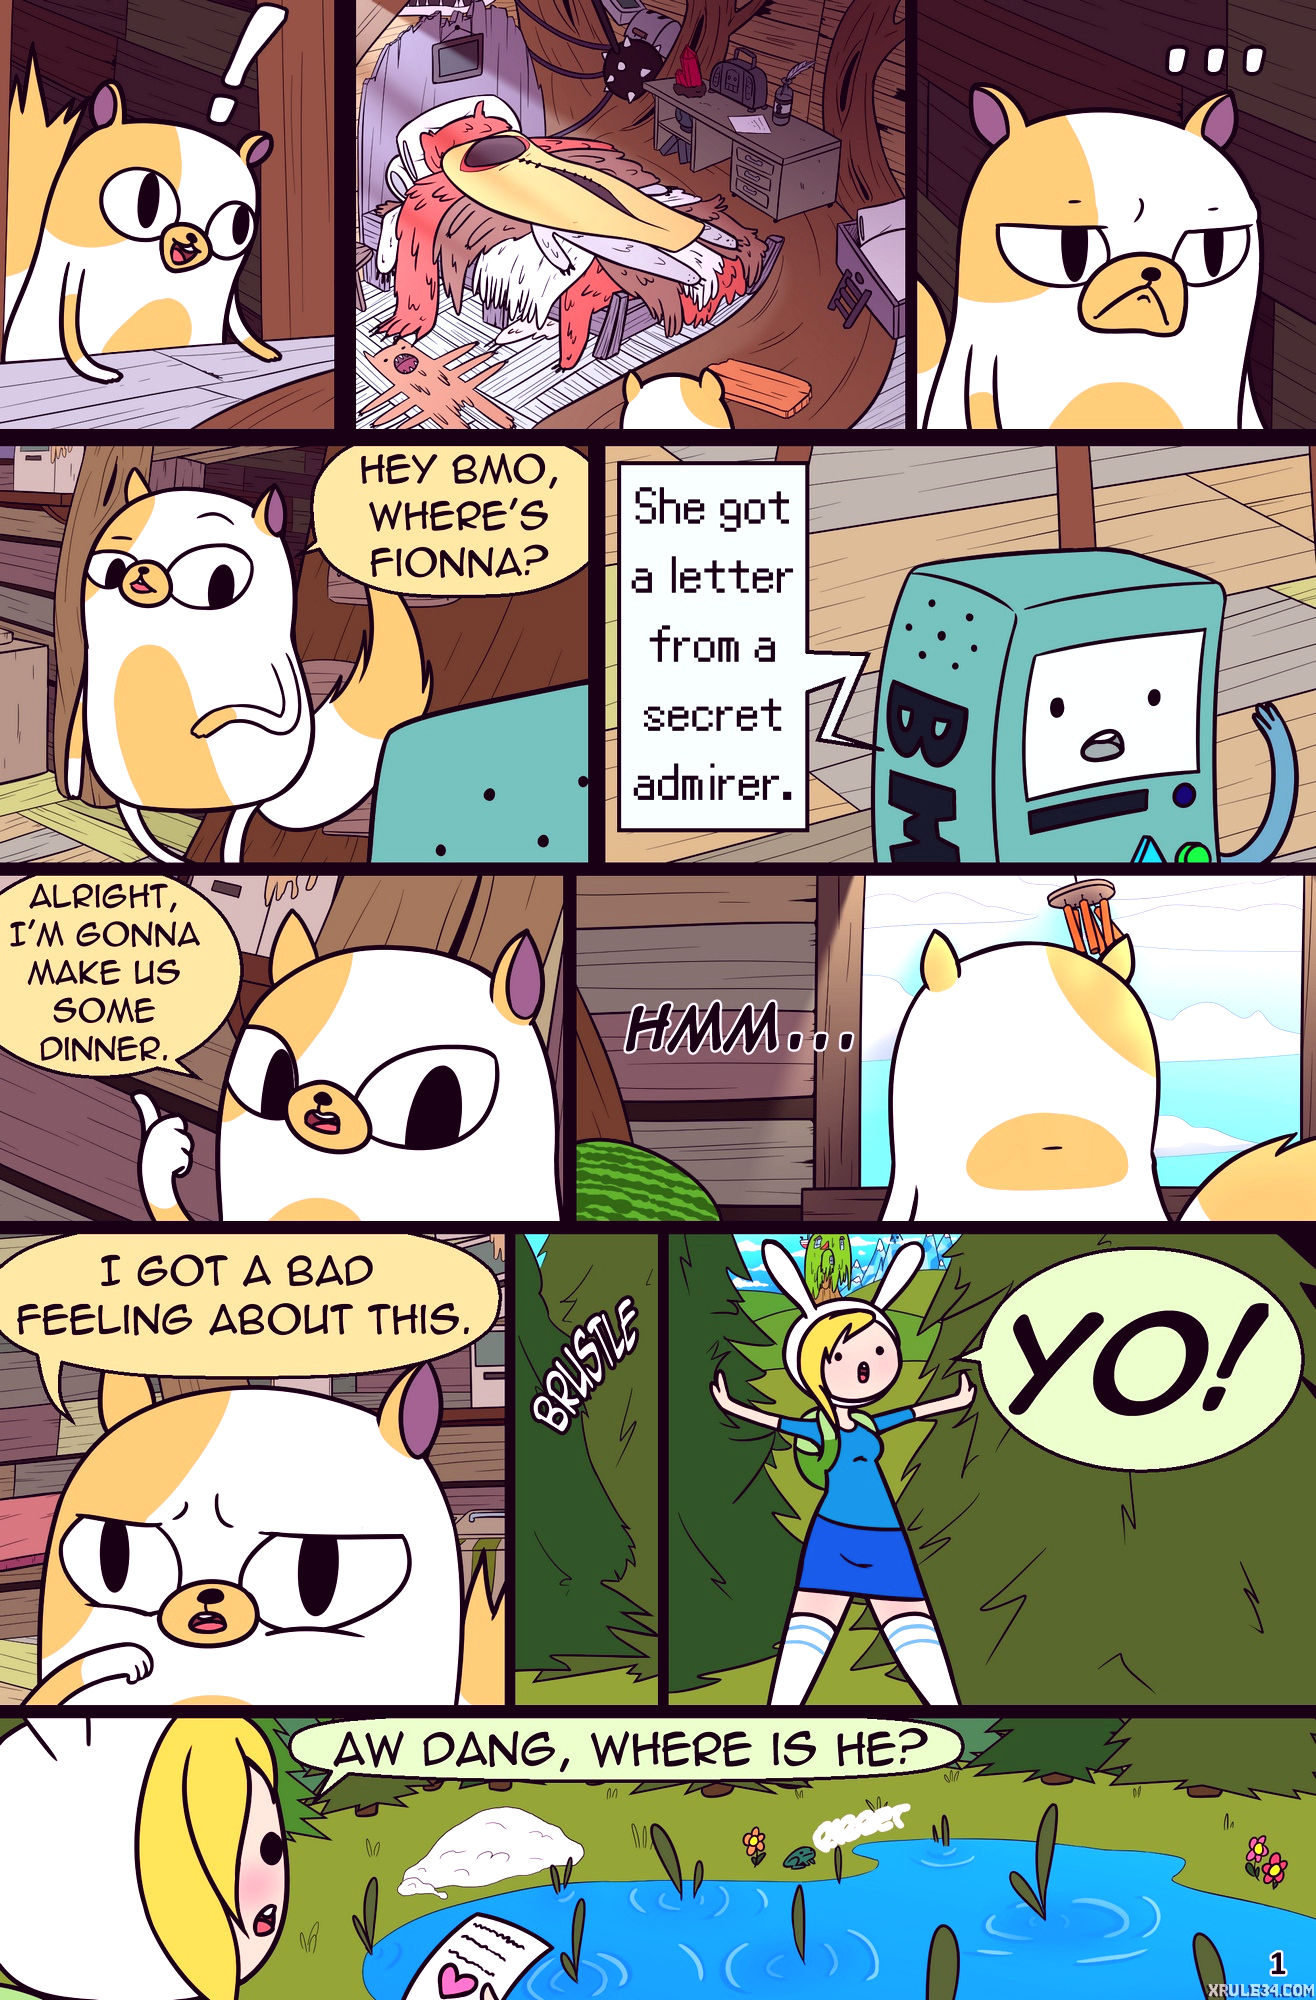 Misadventure time spring special the cat the queen and the forest porn comic picture 2